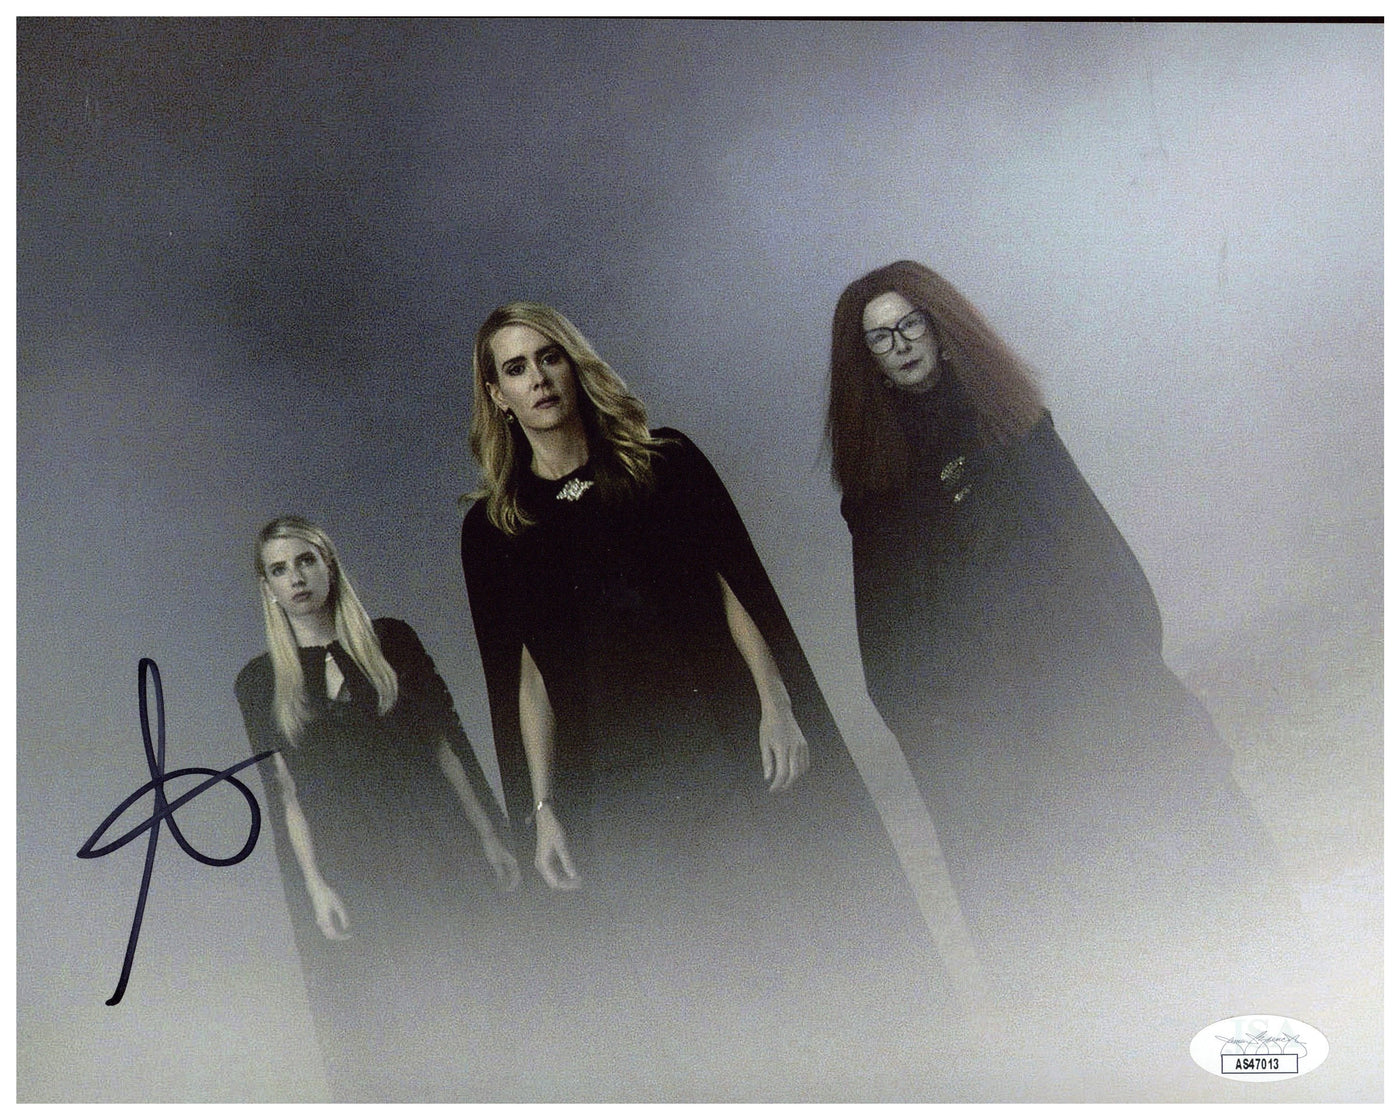 Sarah Paulson Signed 8x10 Photo Authentic American Horror Story Autographed JSA 3